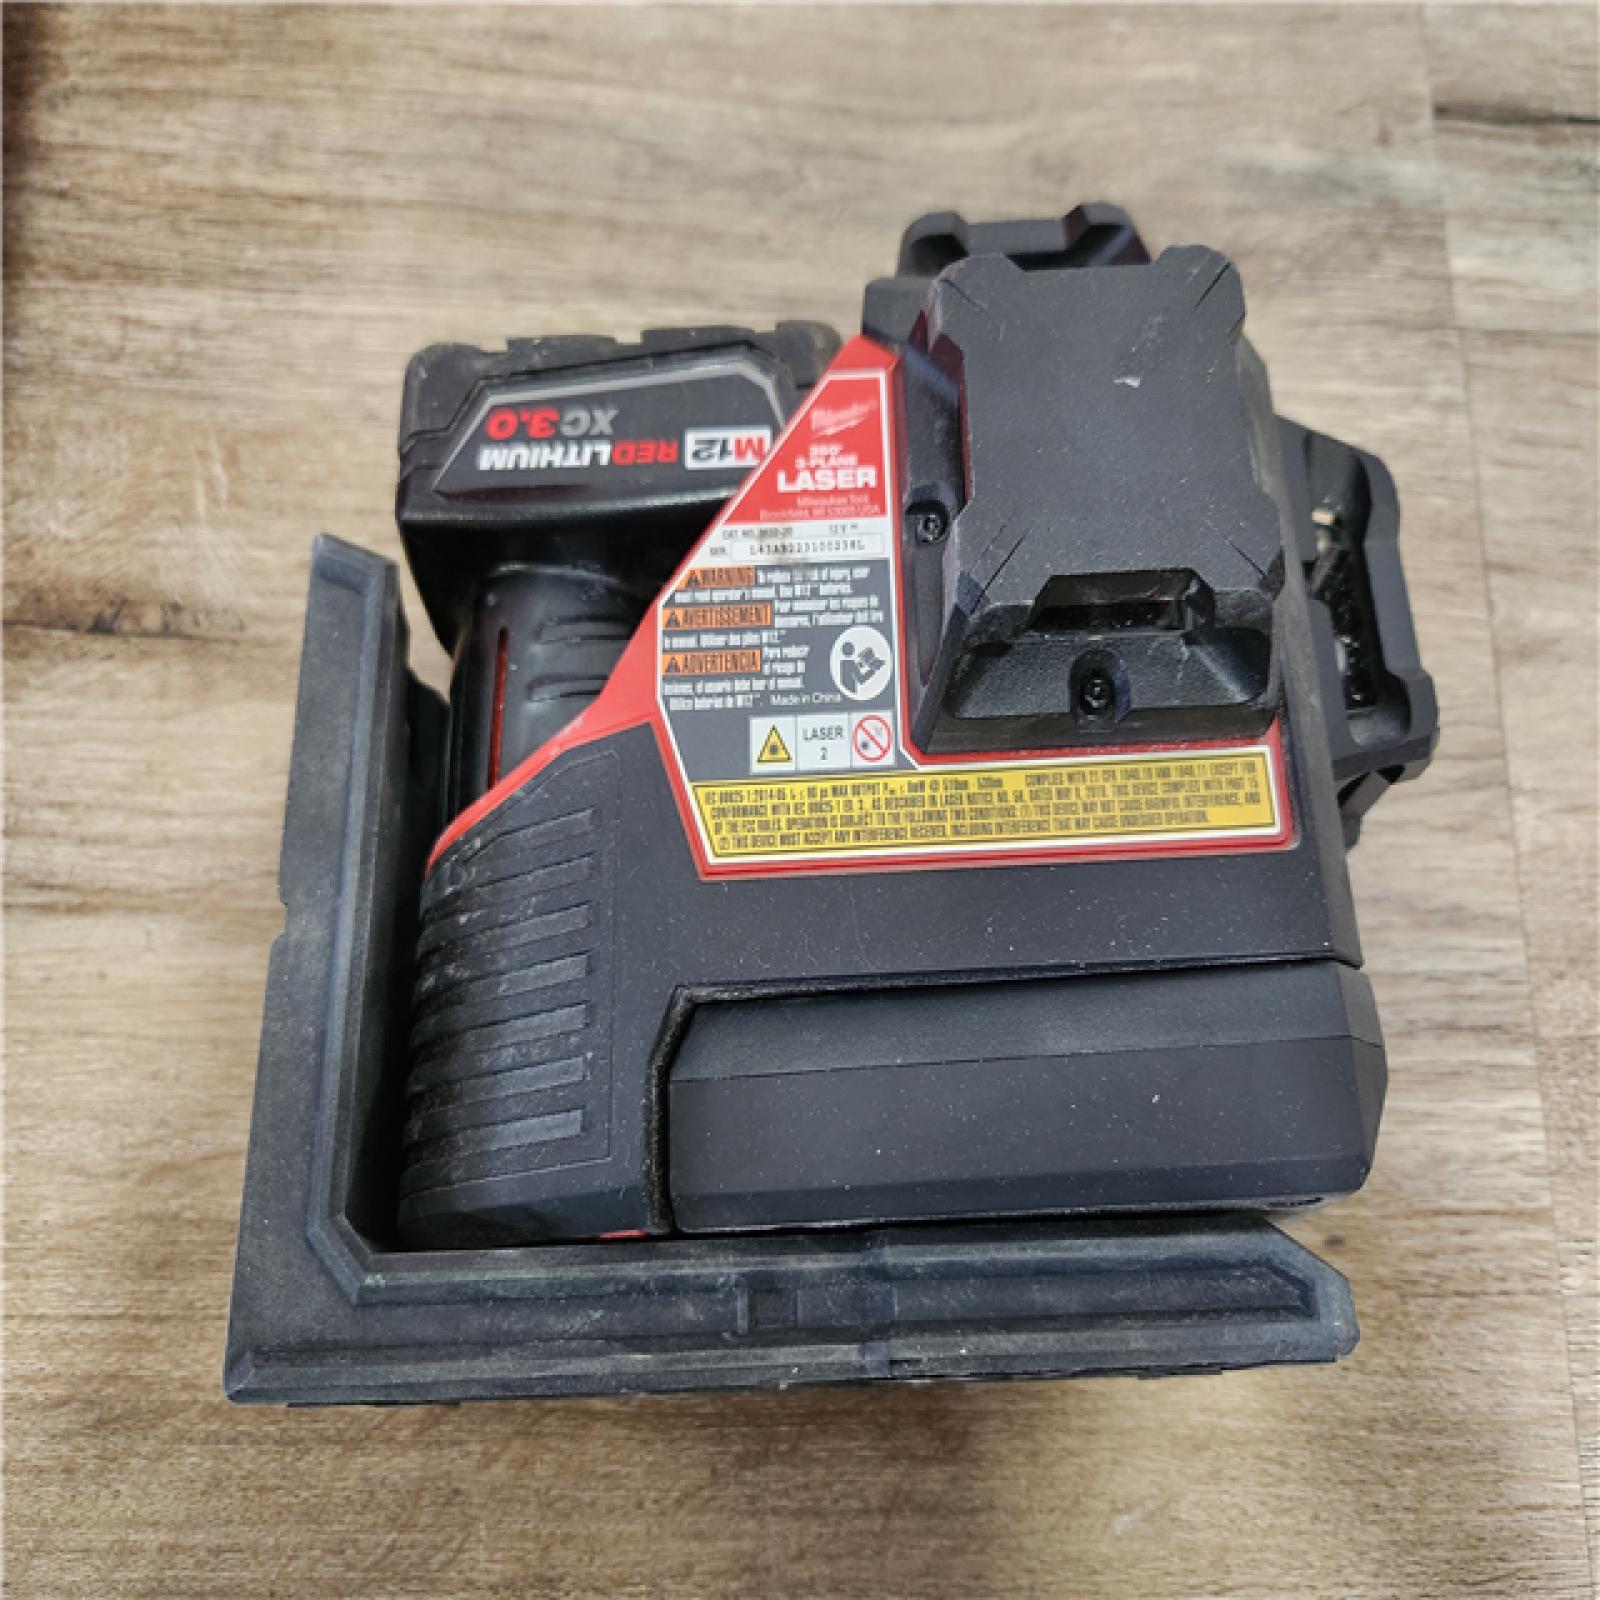 Phoenix Location LIKE NEW Milwaukee M12 12-Volt Lithium-Ion Cordless Green 250 ft. 3-Plane Laser Level Kit with One 4.0 Ah Battery, Charger and Case